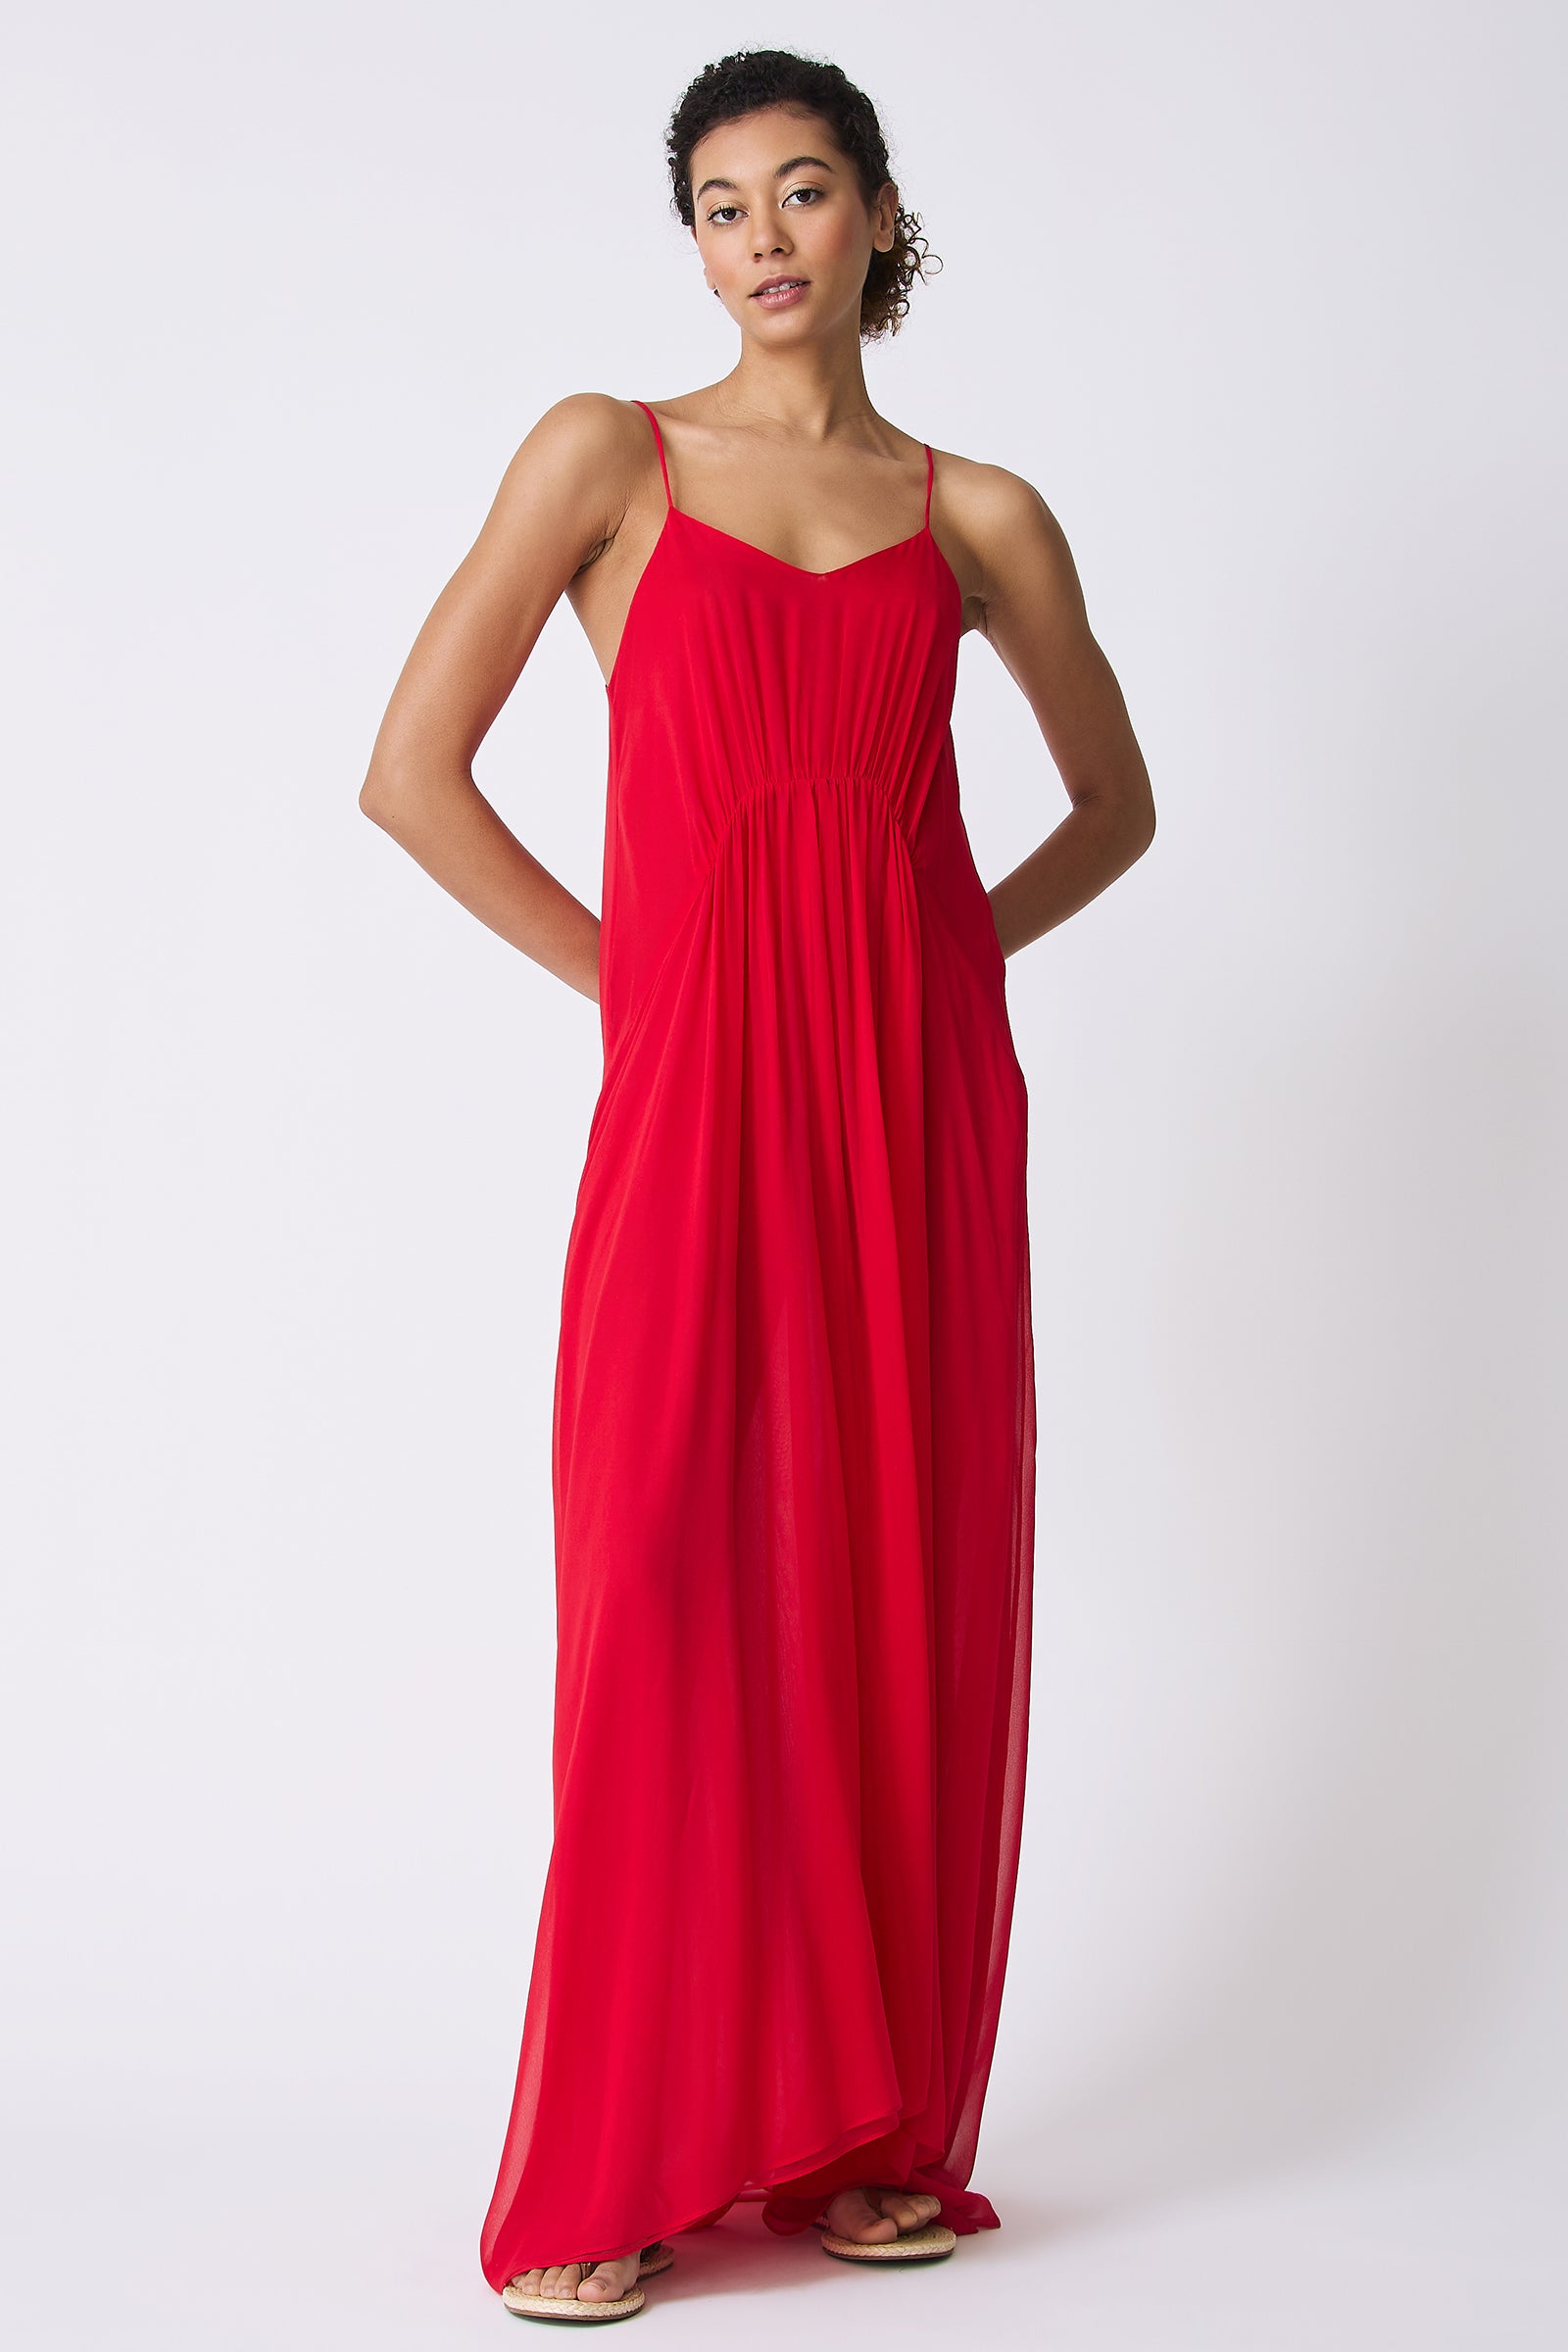 Kal Rieman Cora Shirred Maxi Dress in Red on model with hands behind back full front view